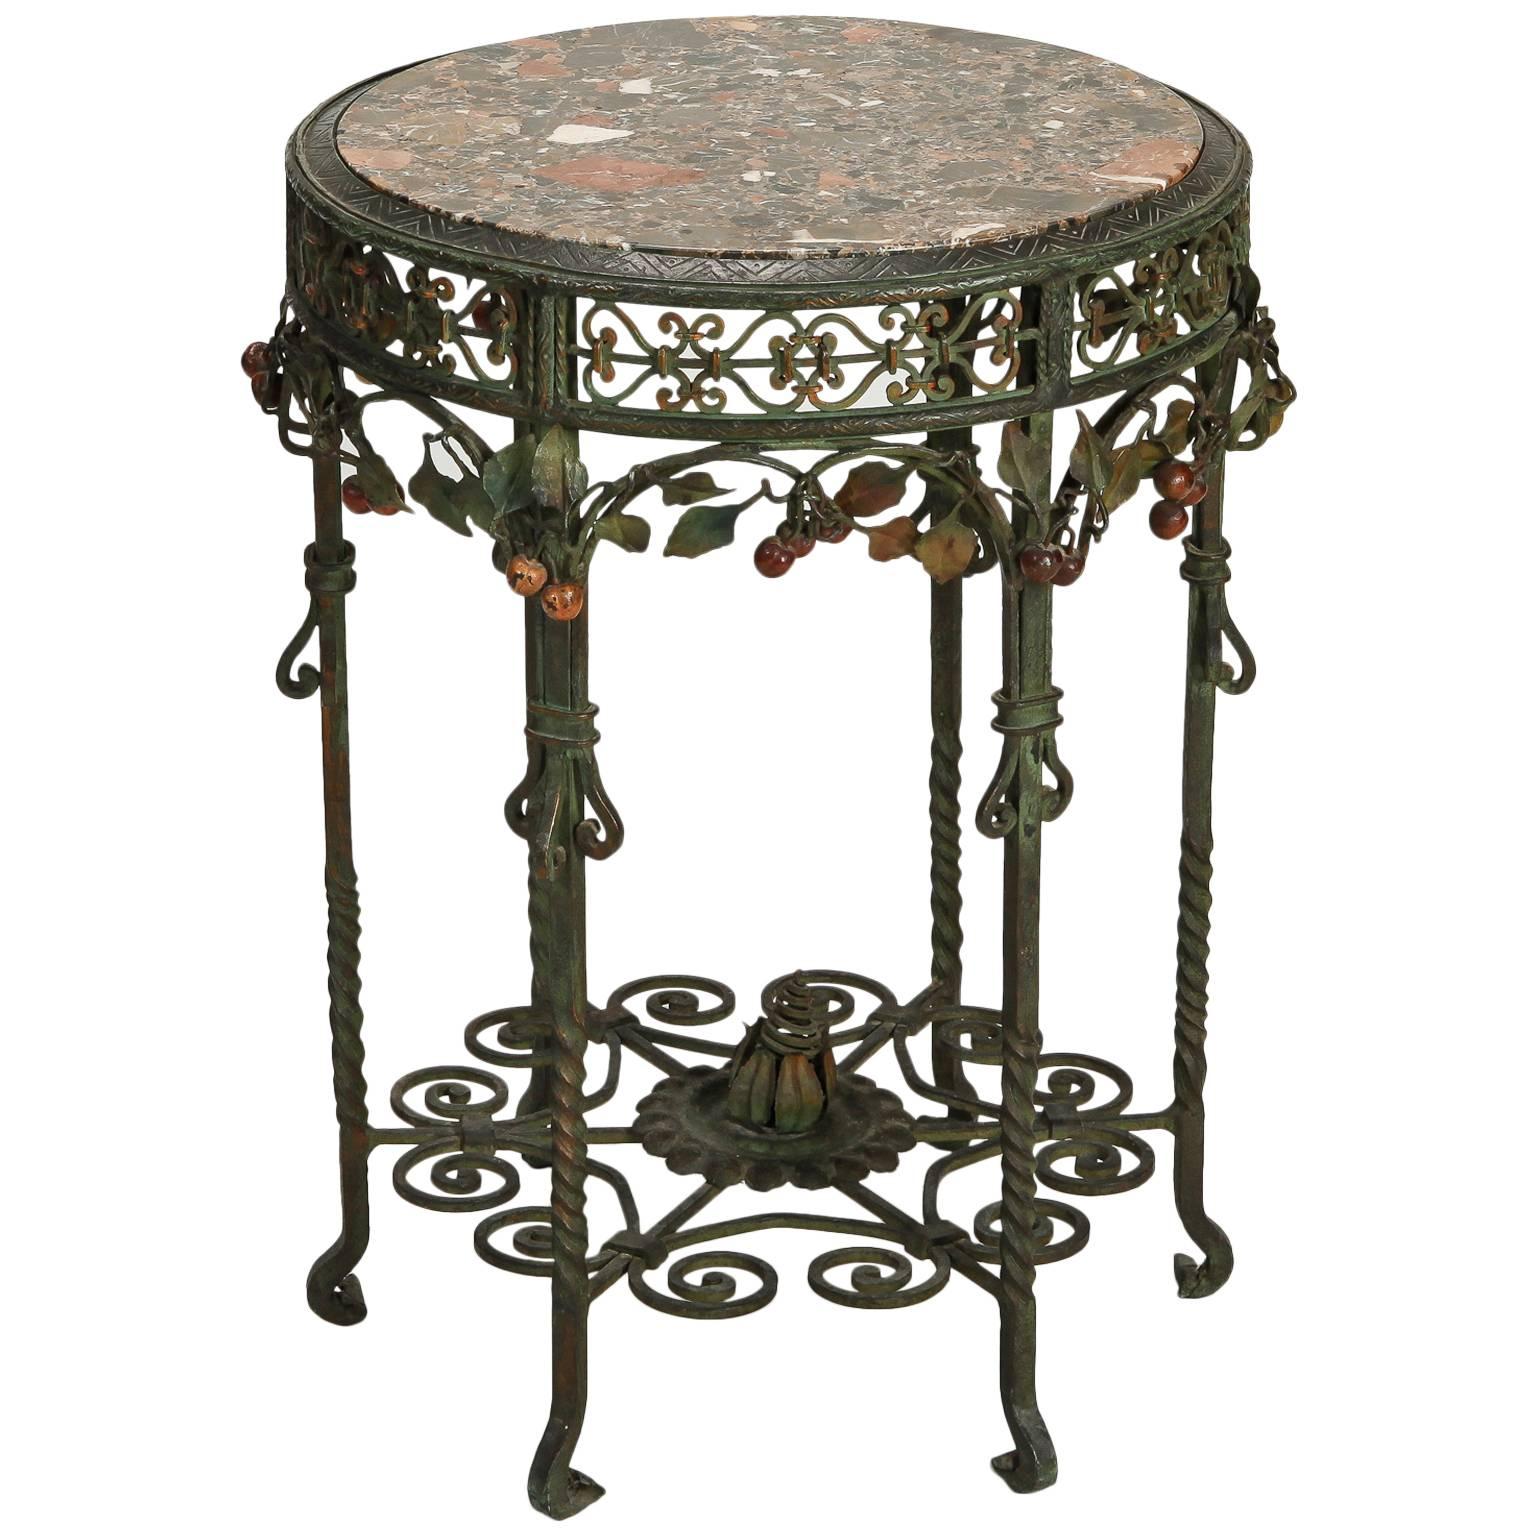 Small Center Table with Marble Top and Elaborate Iron Base